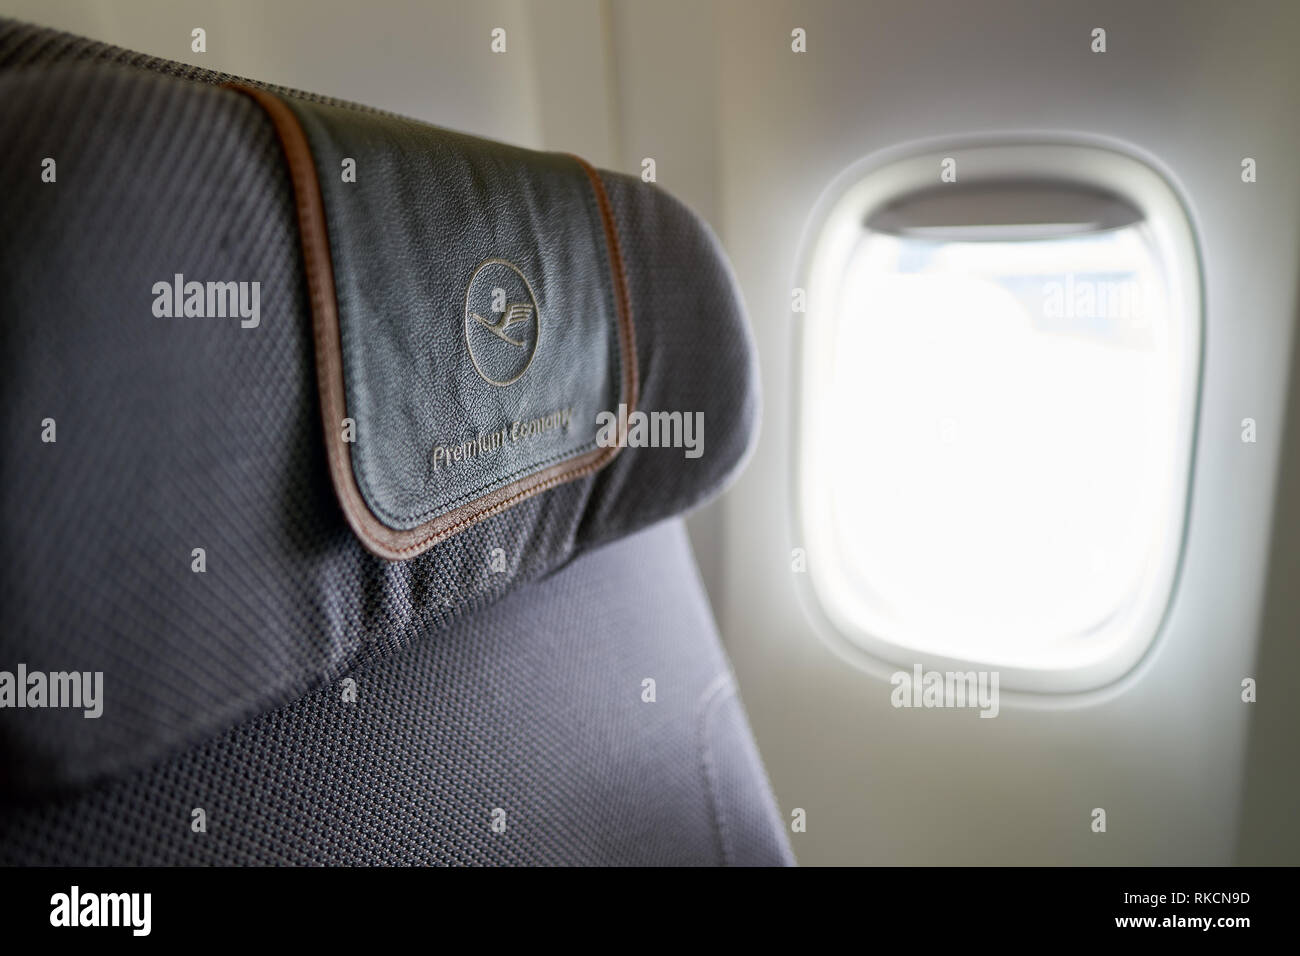 NEW YORK - MARCH 13, 2016: interior of Boeing 747-8I. The Boeing 747 is an American wide-body commercial jet airliner and cargo aircraft, often referr Stock Photo